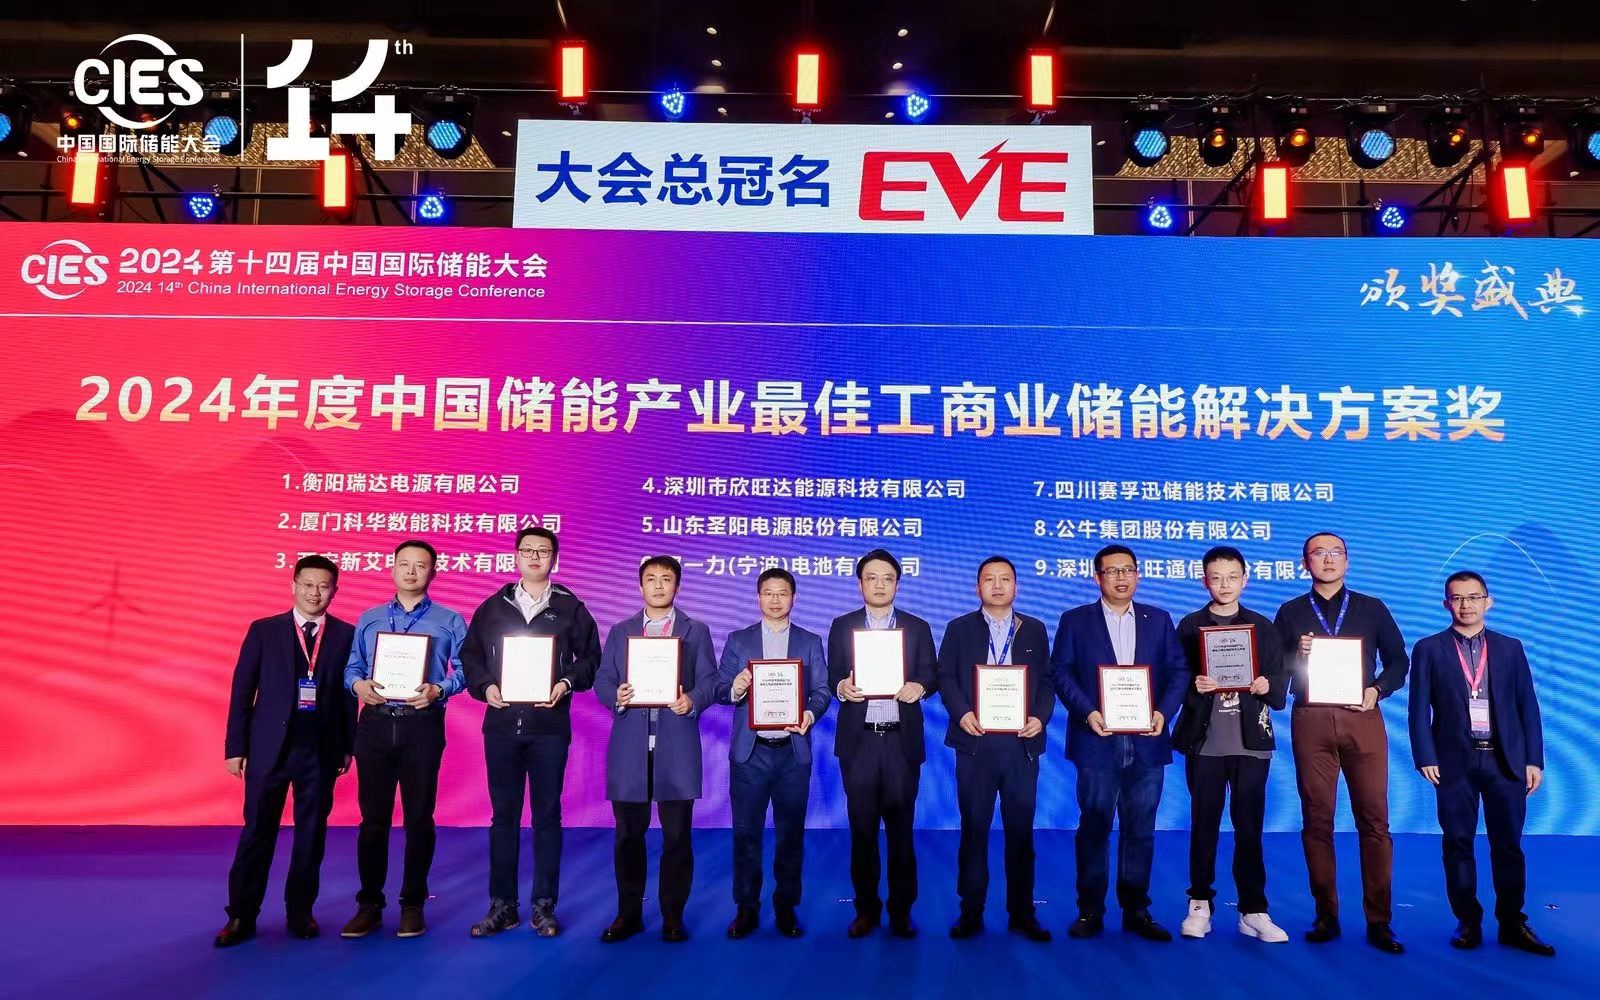 SFQ Garners Recognition at Energy Storage Conference, Wins “2024 China’s Best Industrial and Commercial Energy Storage Solution Award”